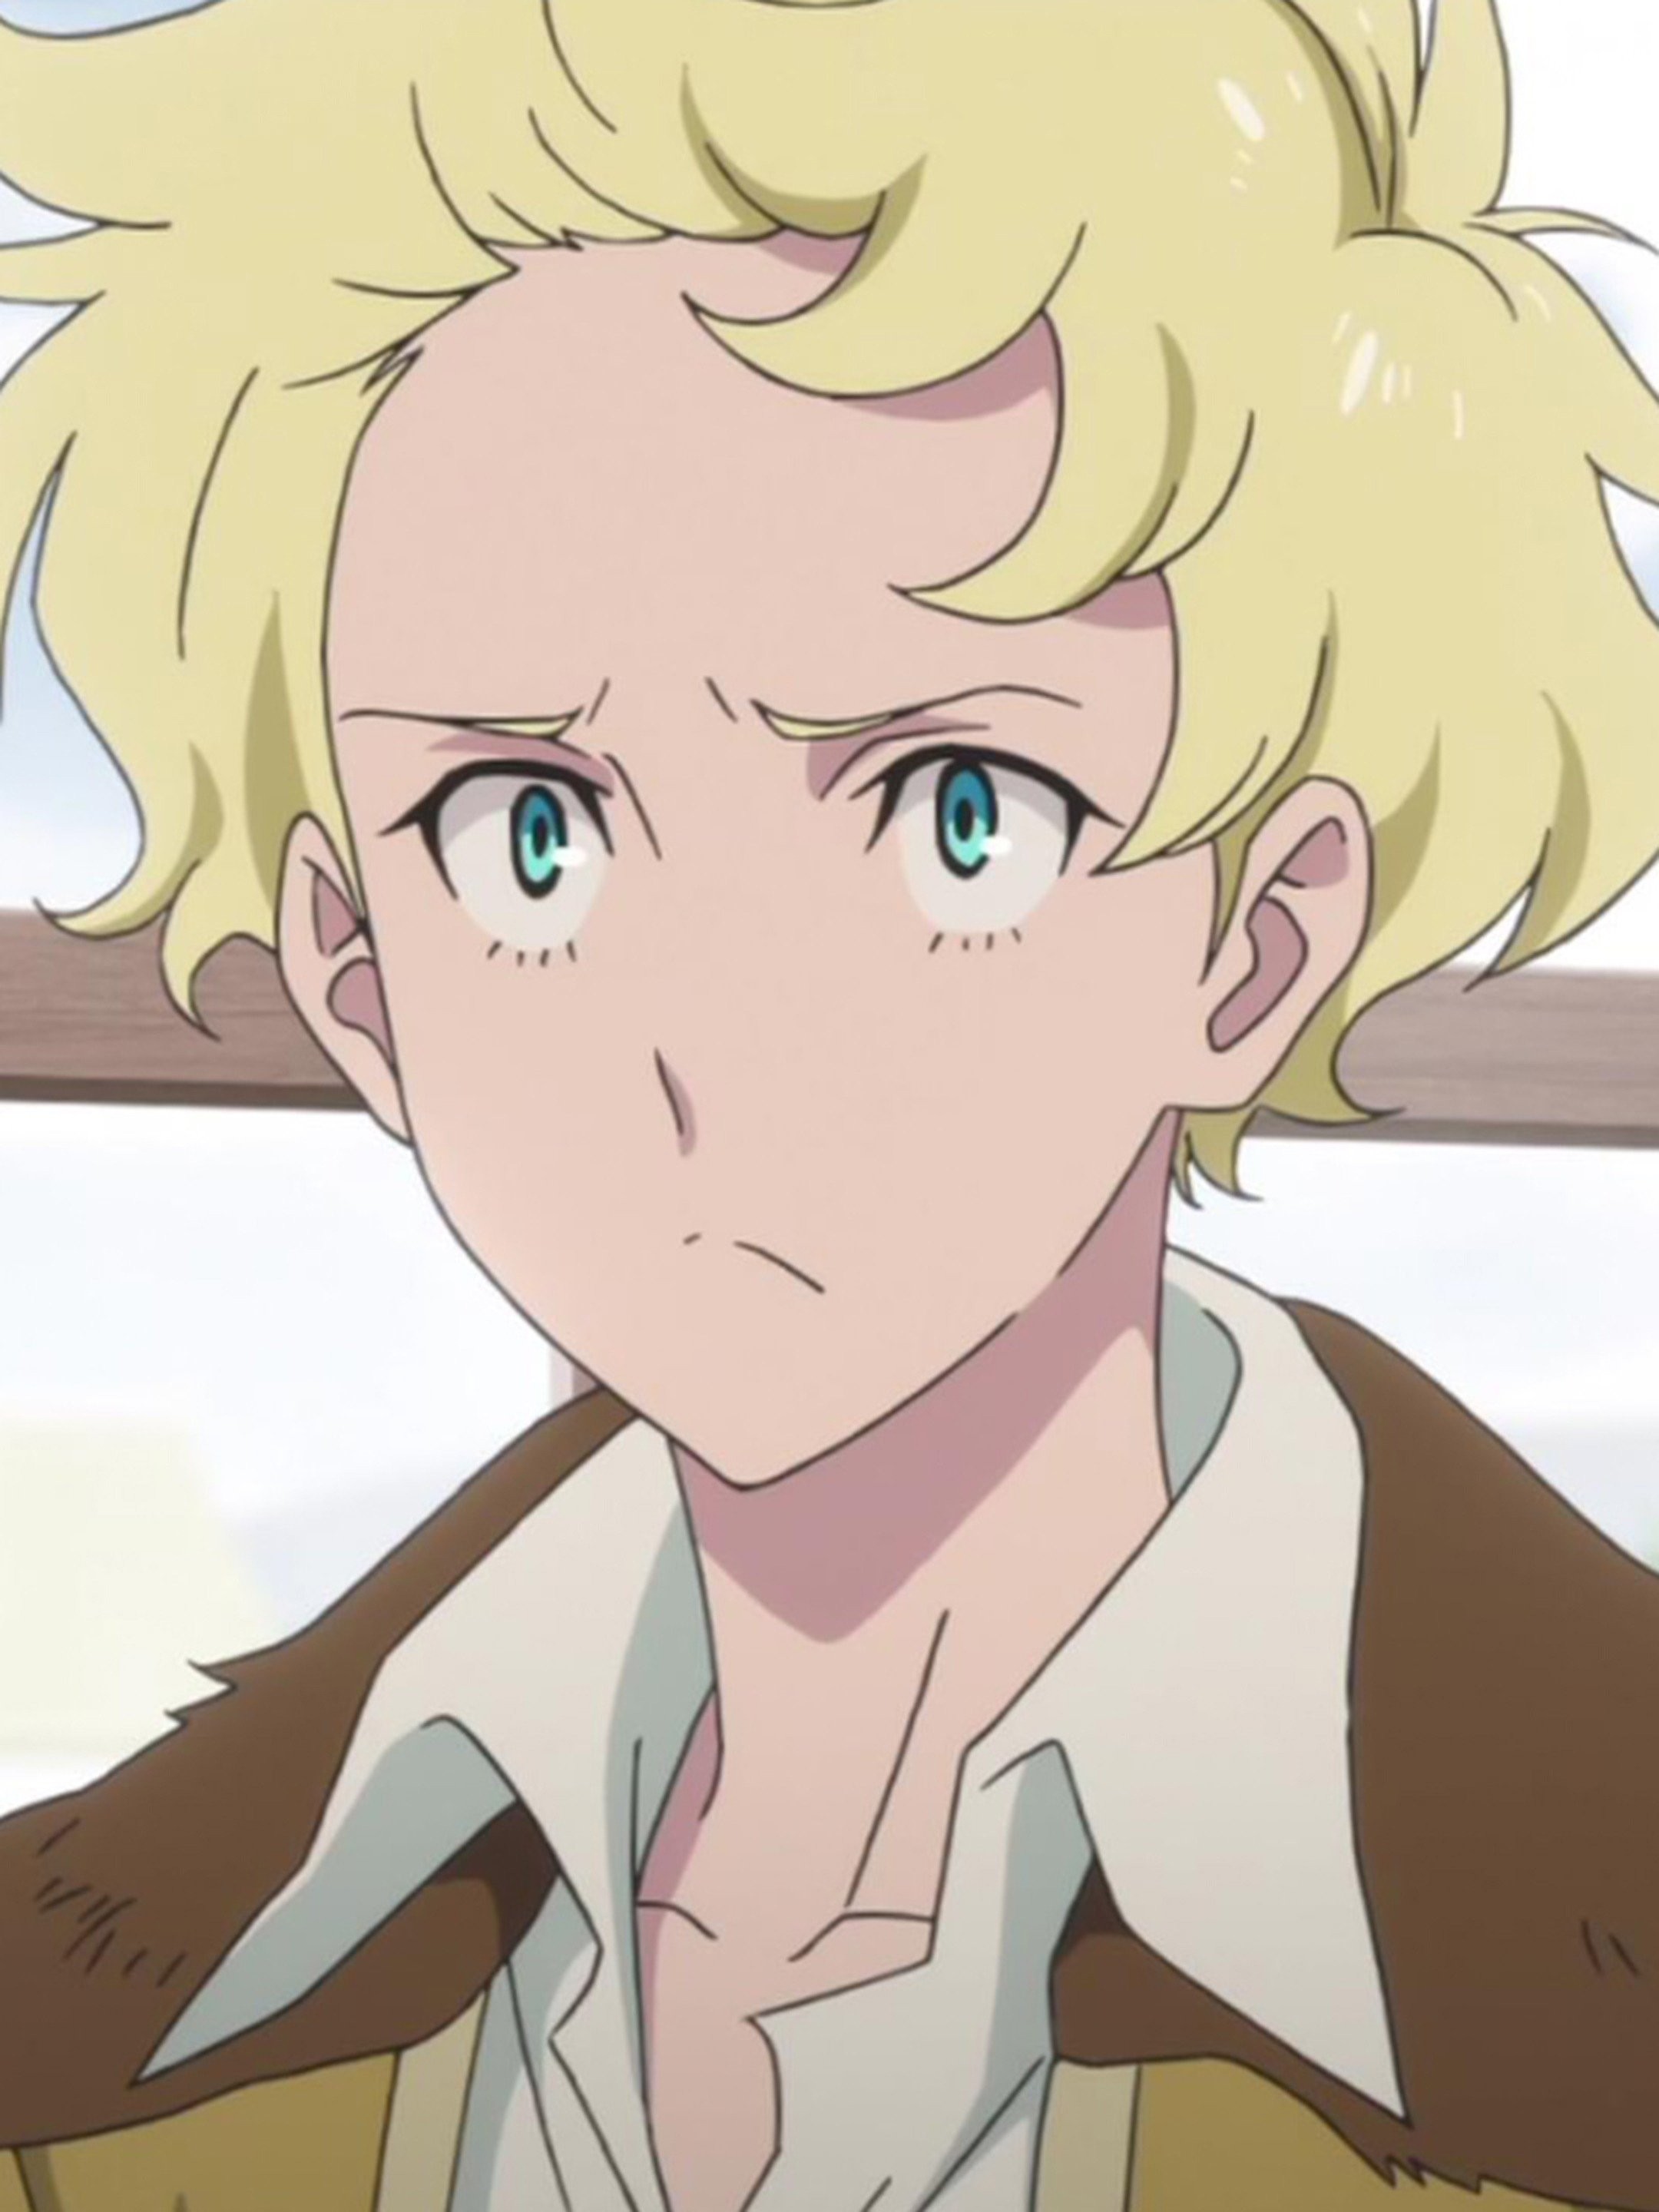 Sirius the Jaeger - Review - Anime News Network